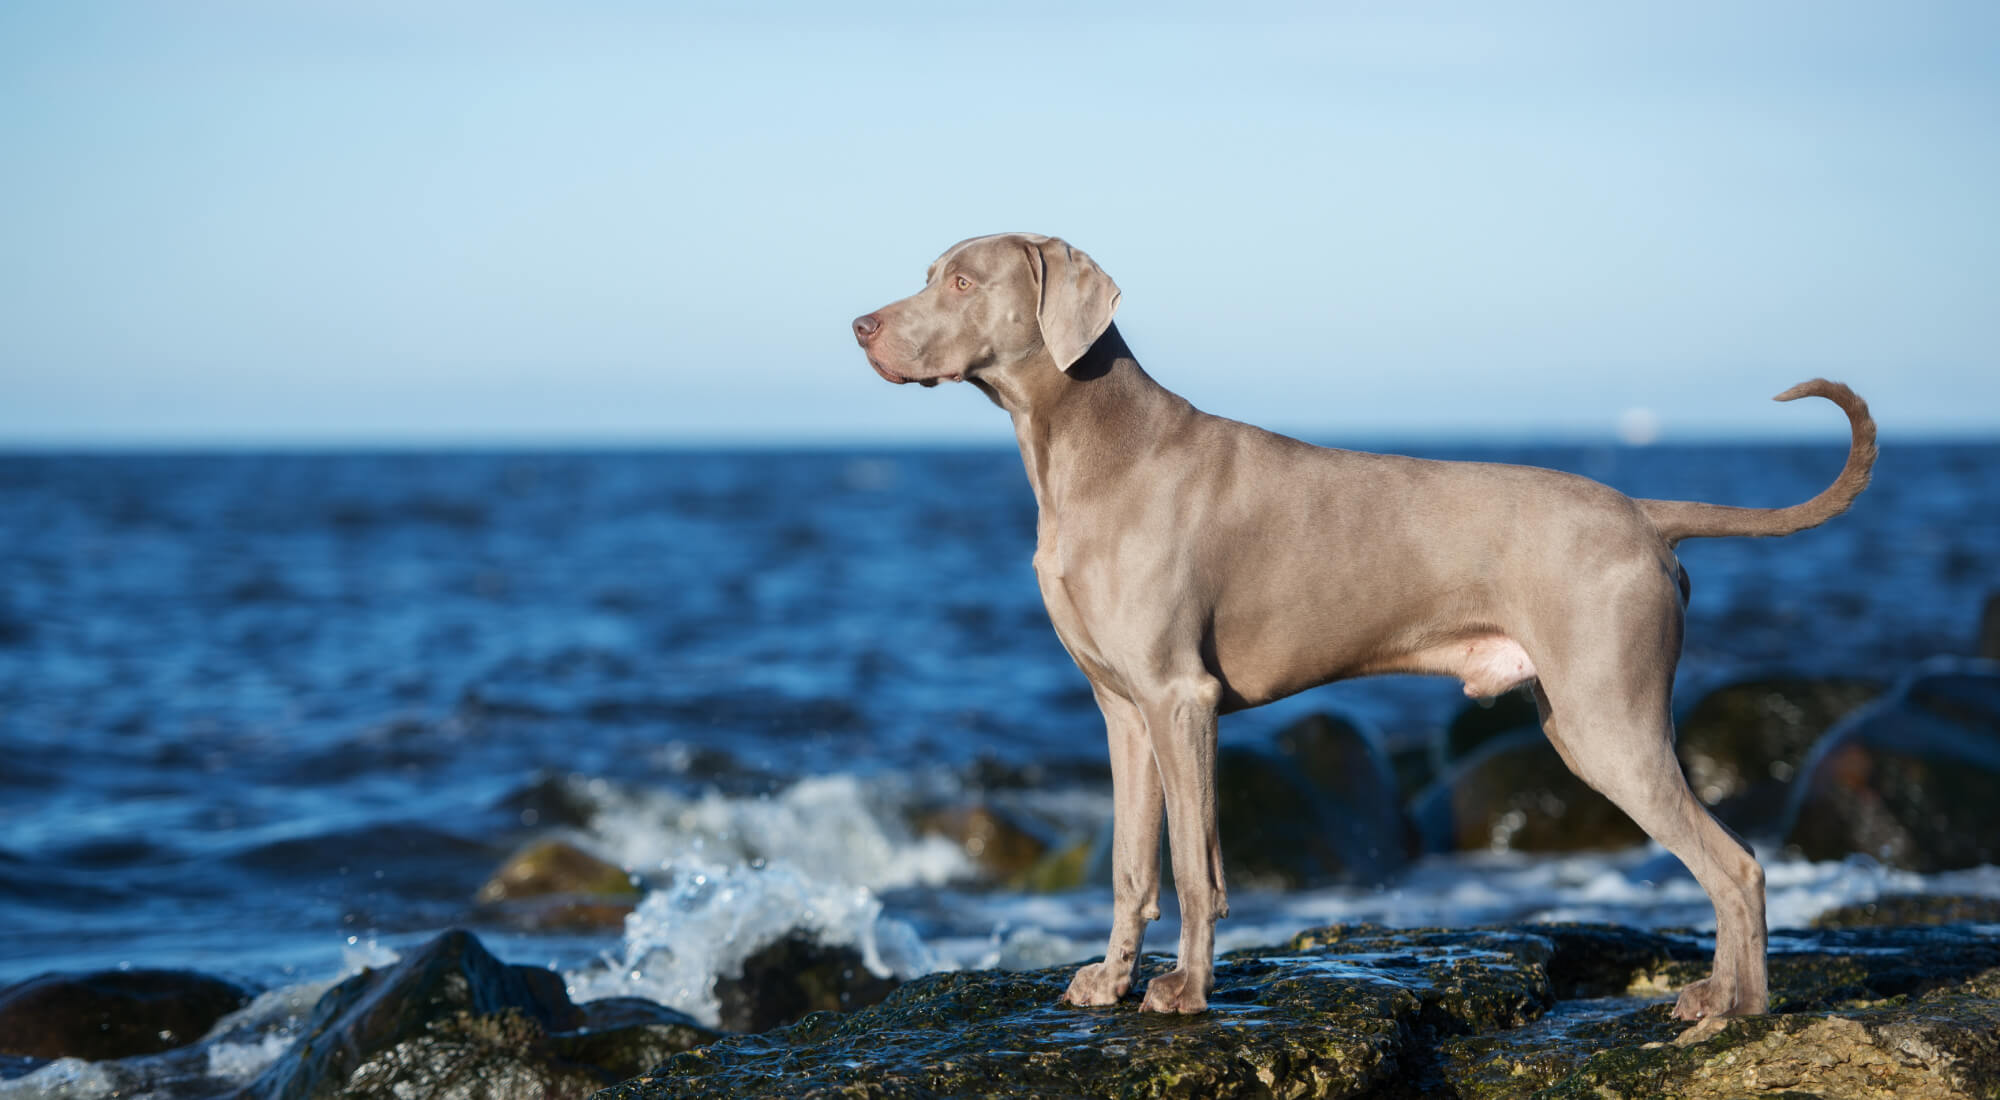 Chester the Dog standing on rocks looking at ocean